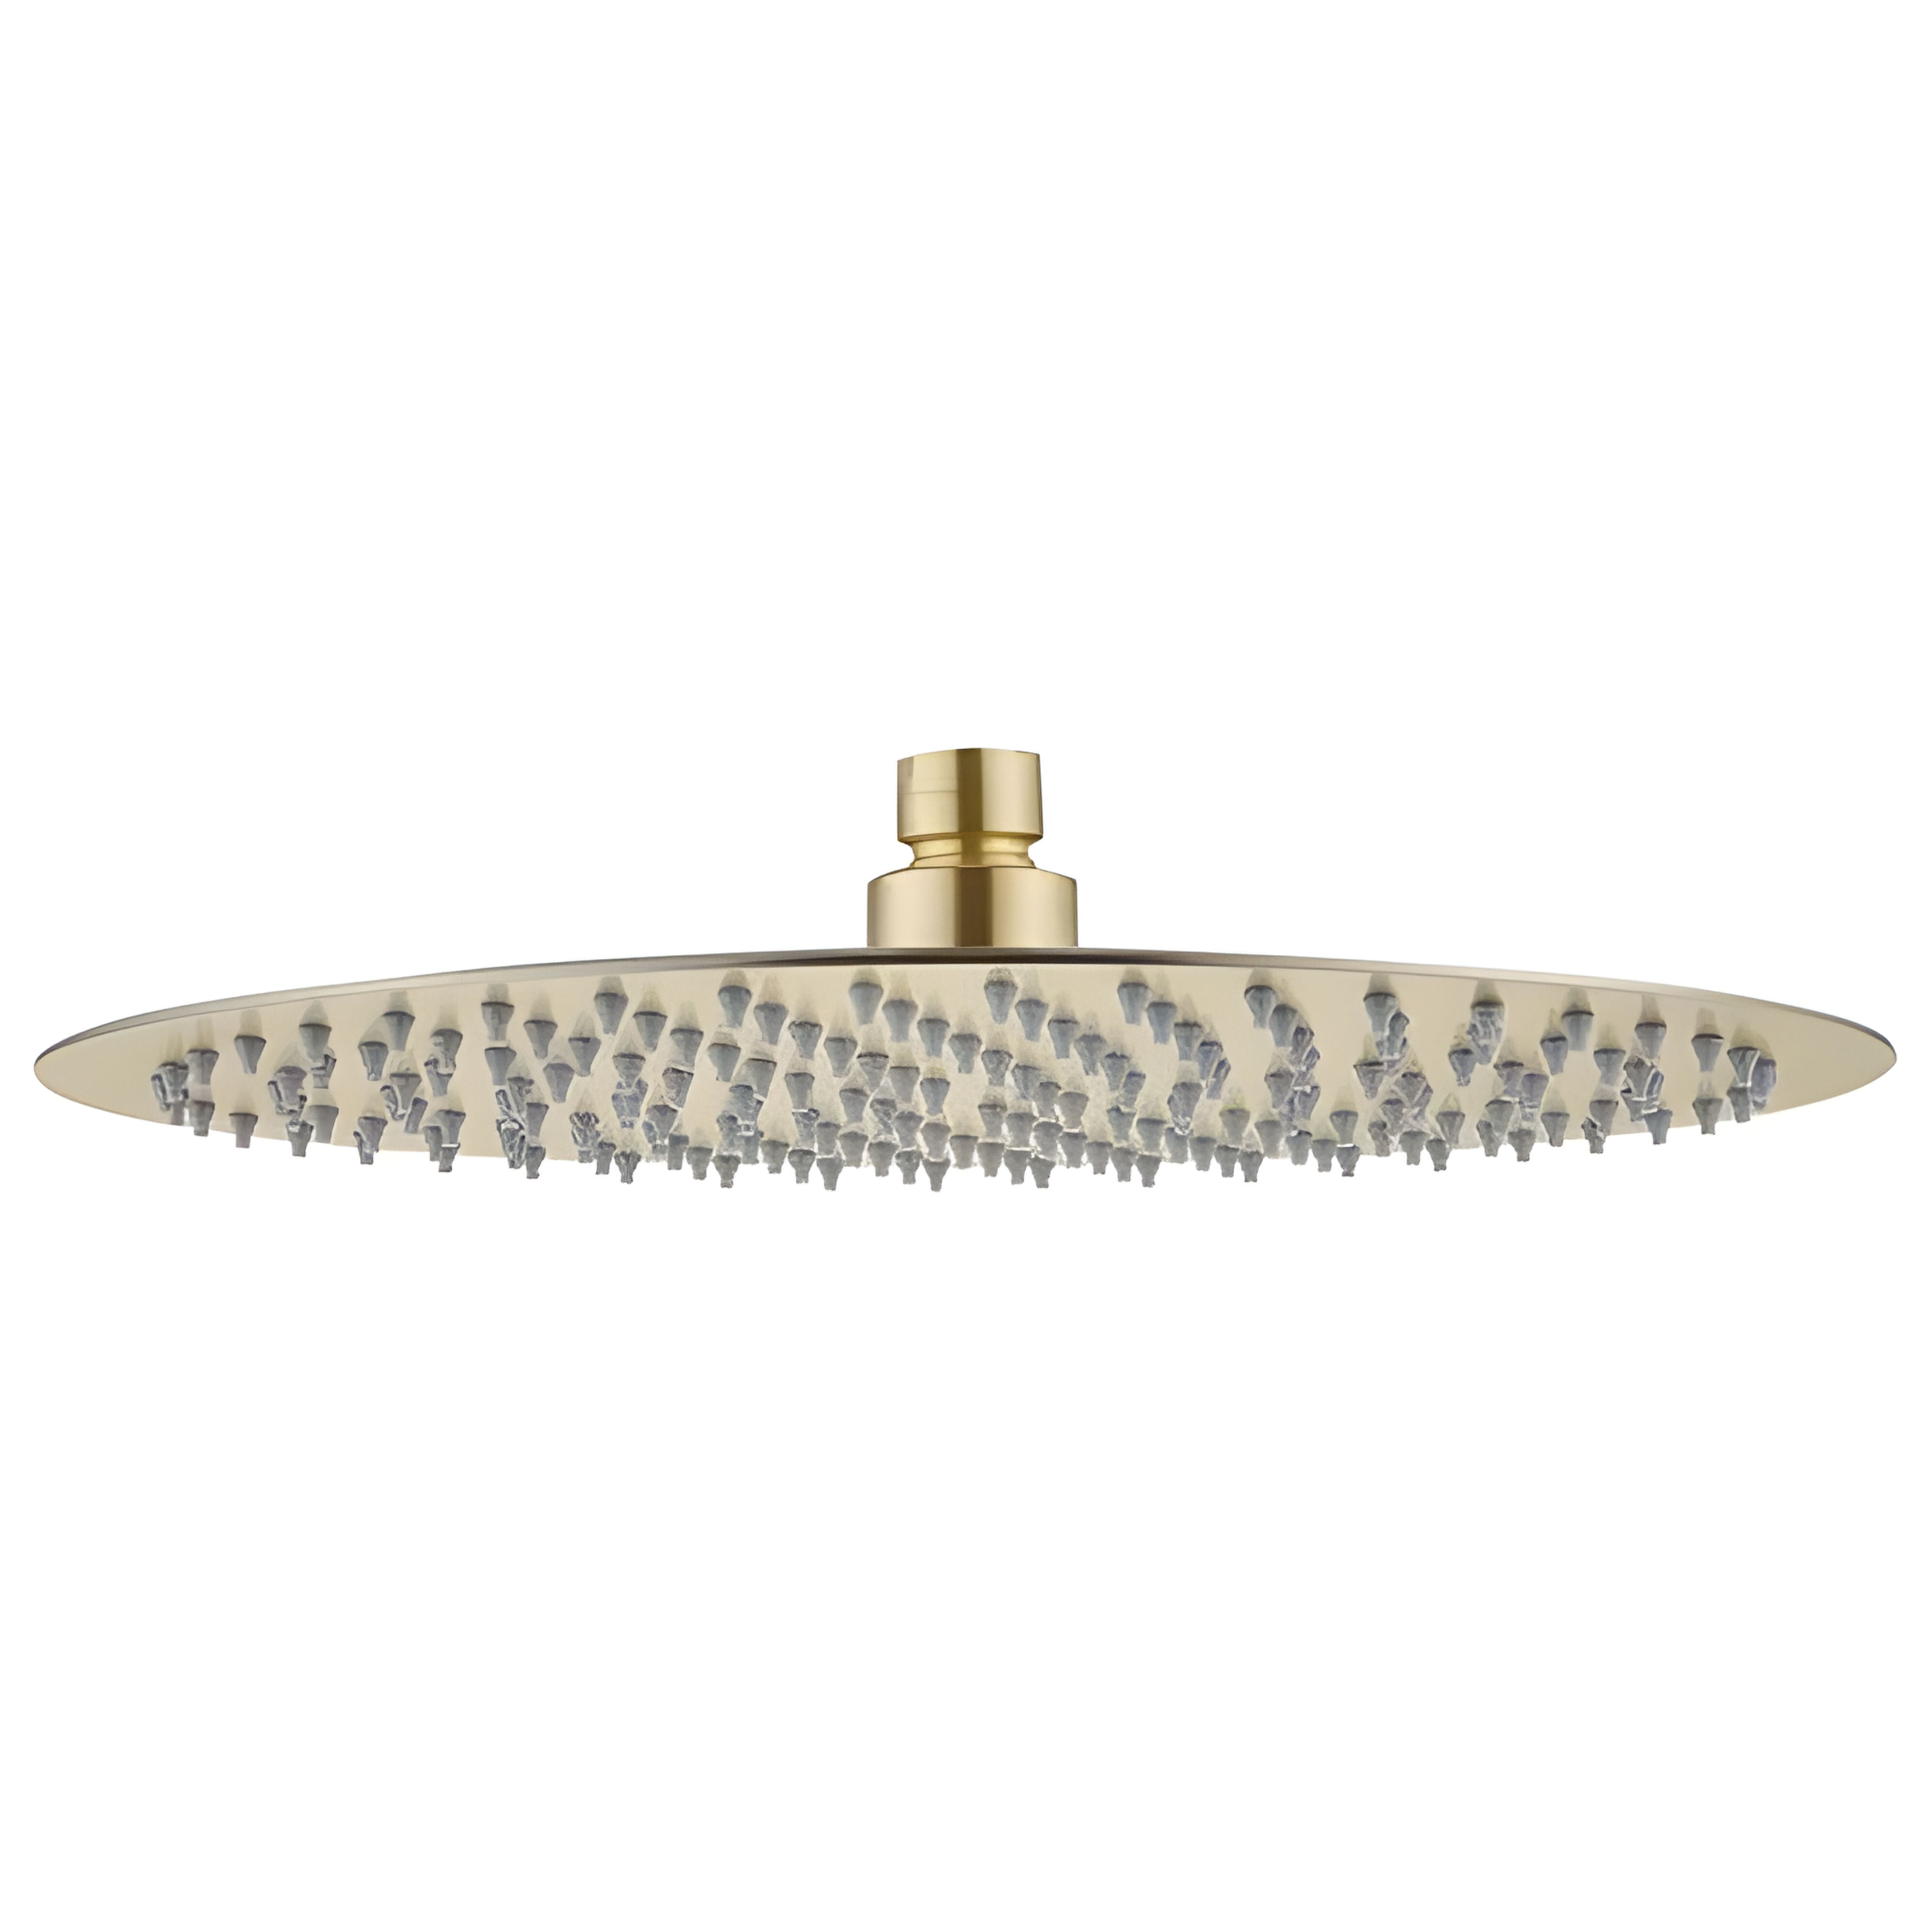 HELLYCAR STAINLESS STEEL SHOWER HEAD ROUND BRUSHED GOLD 300MM